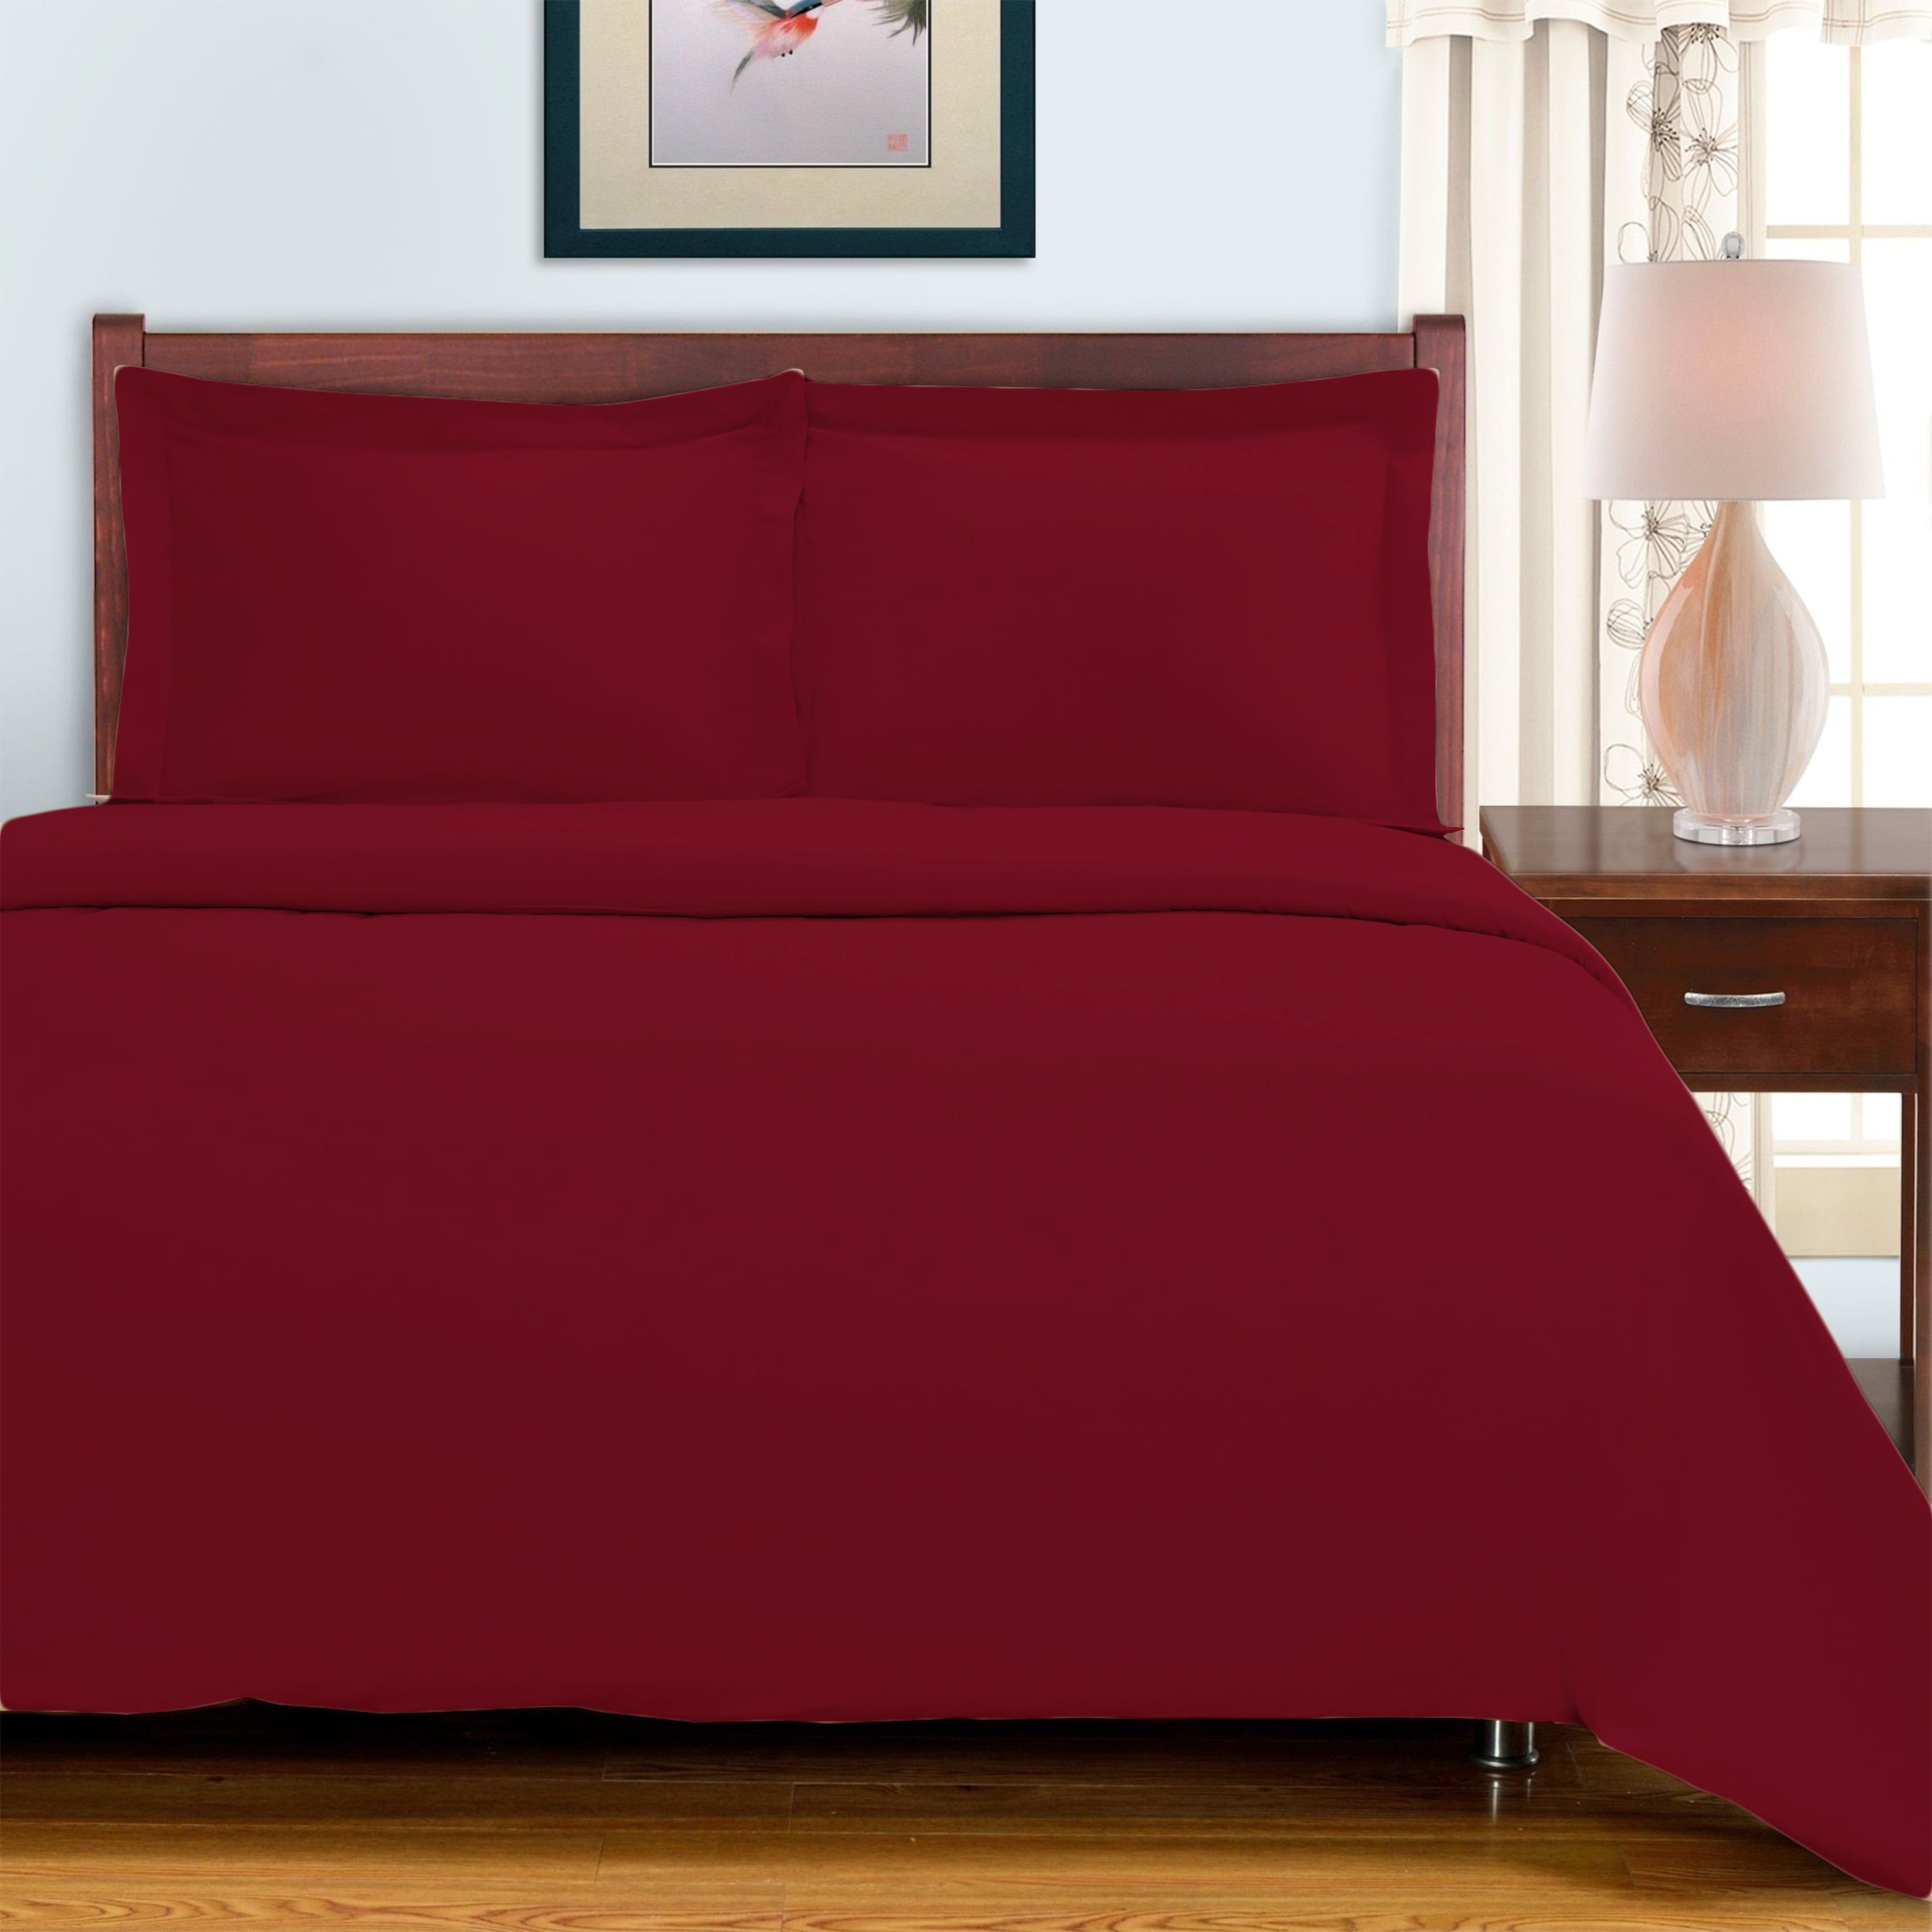 Details about   1000 Thread Count Egyptian Cotton Deep Pocket Sheet Set by Blue Nile Mills 